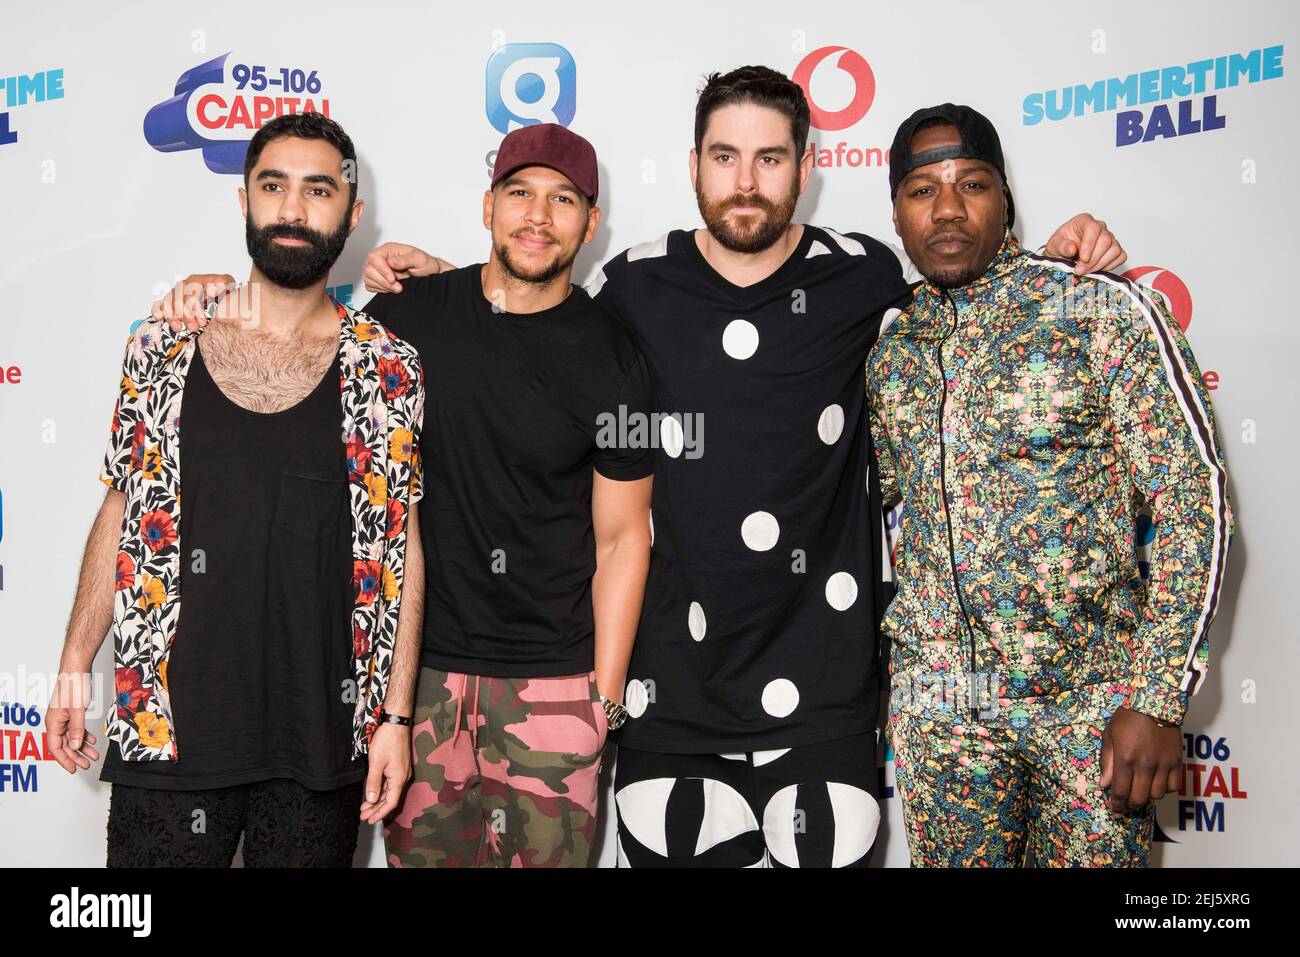 Rudimental on the red carpet of the media run at Capital's Summertime Ball with Vodafone at Wembley Stadium, London. This summer's hottest artists performed live for 80,000 Capital listeners at Wembley Stadium at the UK's biggest summer party. Performers included Camila Cabello, Shawn Mendes, Rita Ora, Charlie Puth, Jess Glyne, Craig David, Anne-Marie, Rudimental, Sean Paul, Clean Bandit, James Arthur, Sigala, Years & Years, Jax Jones, Raye, Jonas Blue, Mabel, Stefflon Don, Yungen and G-Eazy Stock Photo